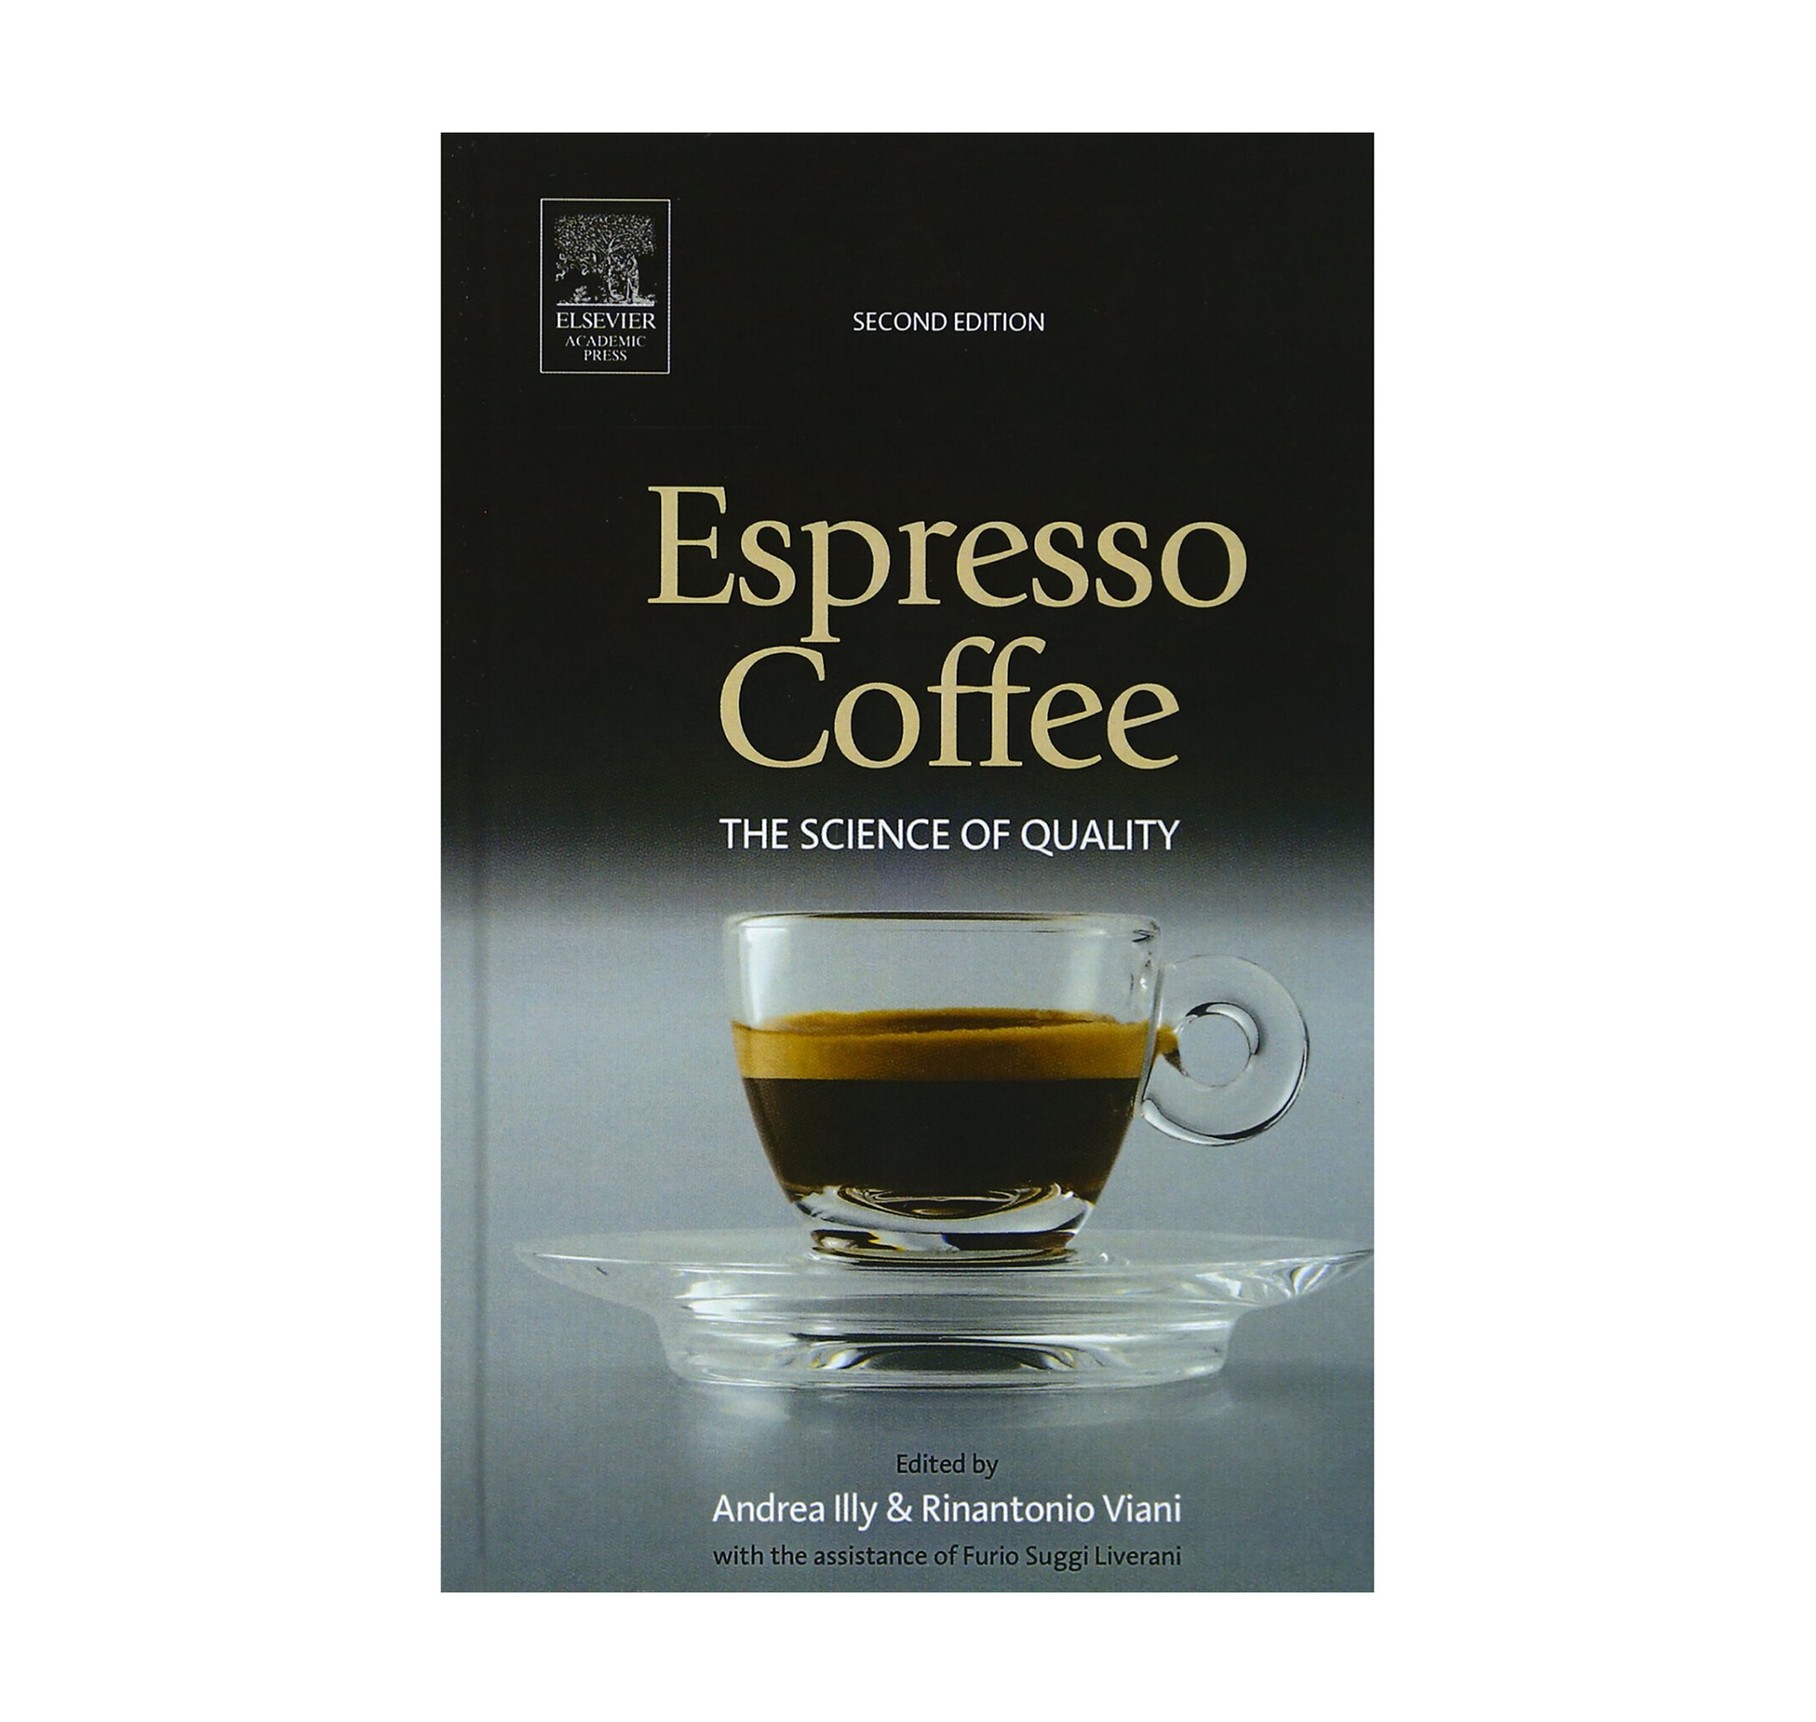 Espresso Coffee - The Science of Quality